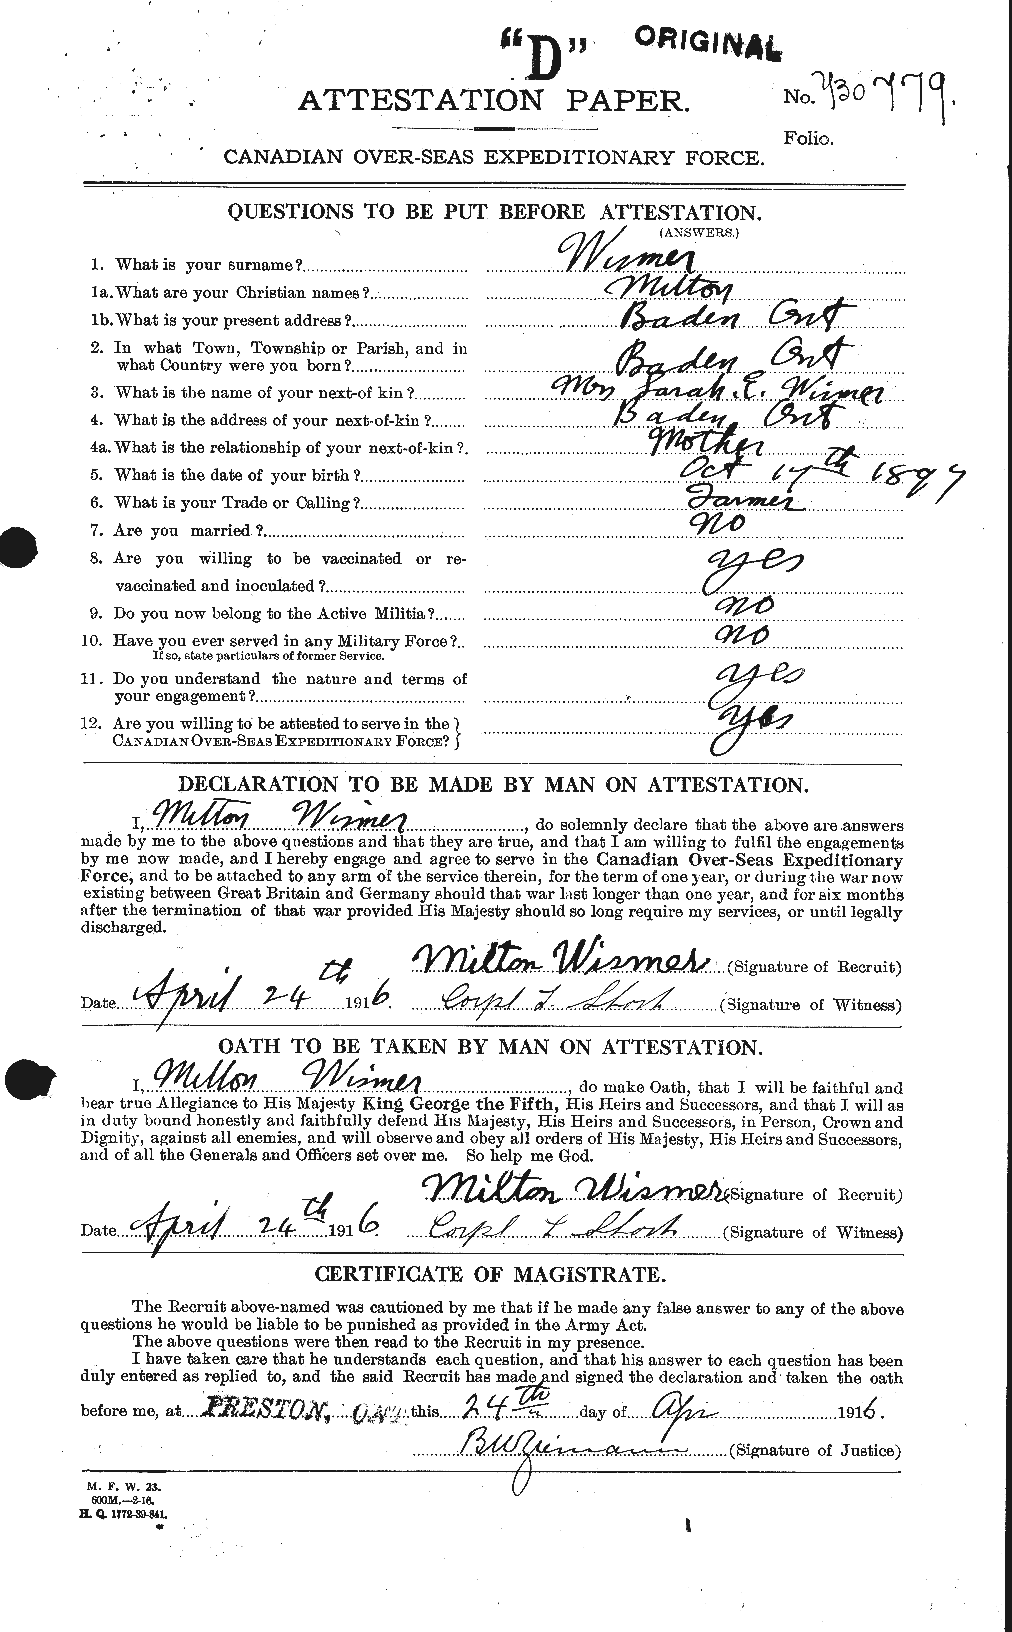 Personnel Records of the First World War - CEF 679833a